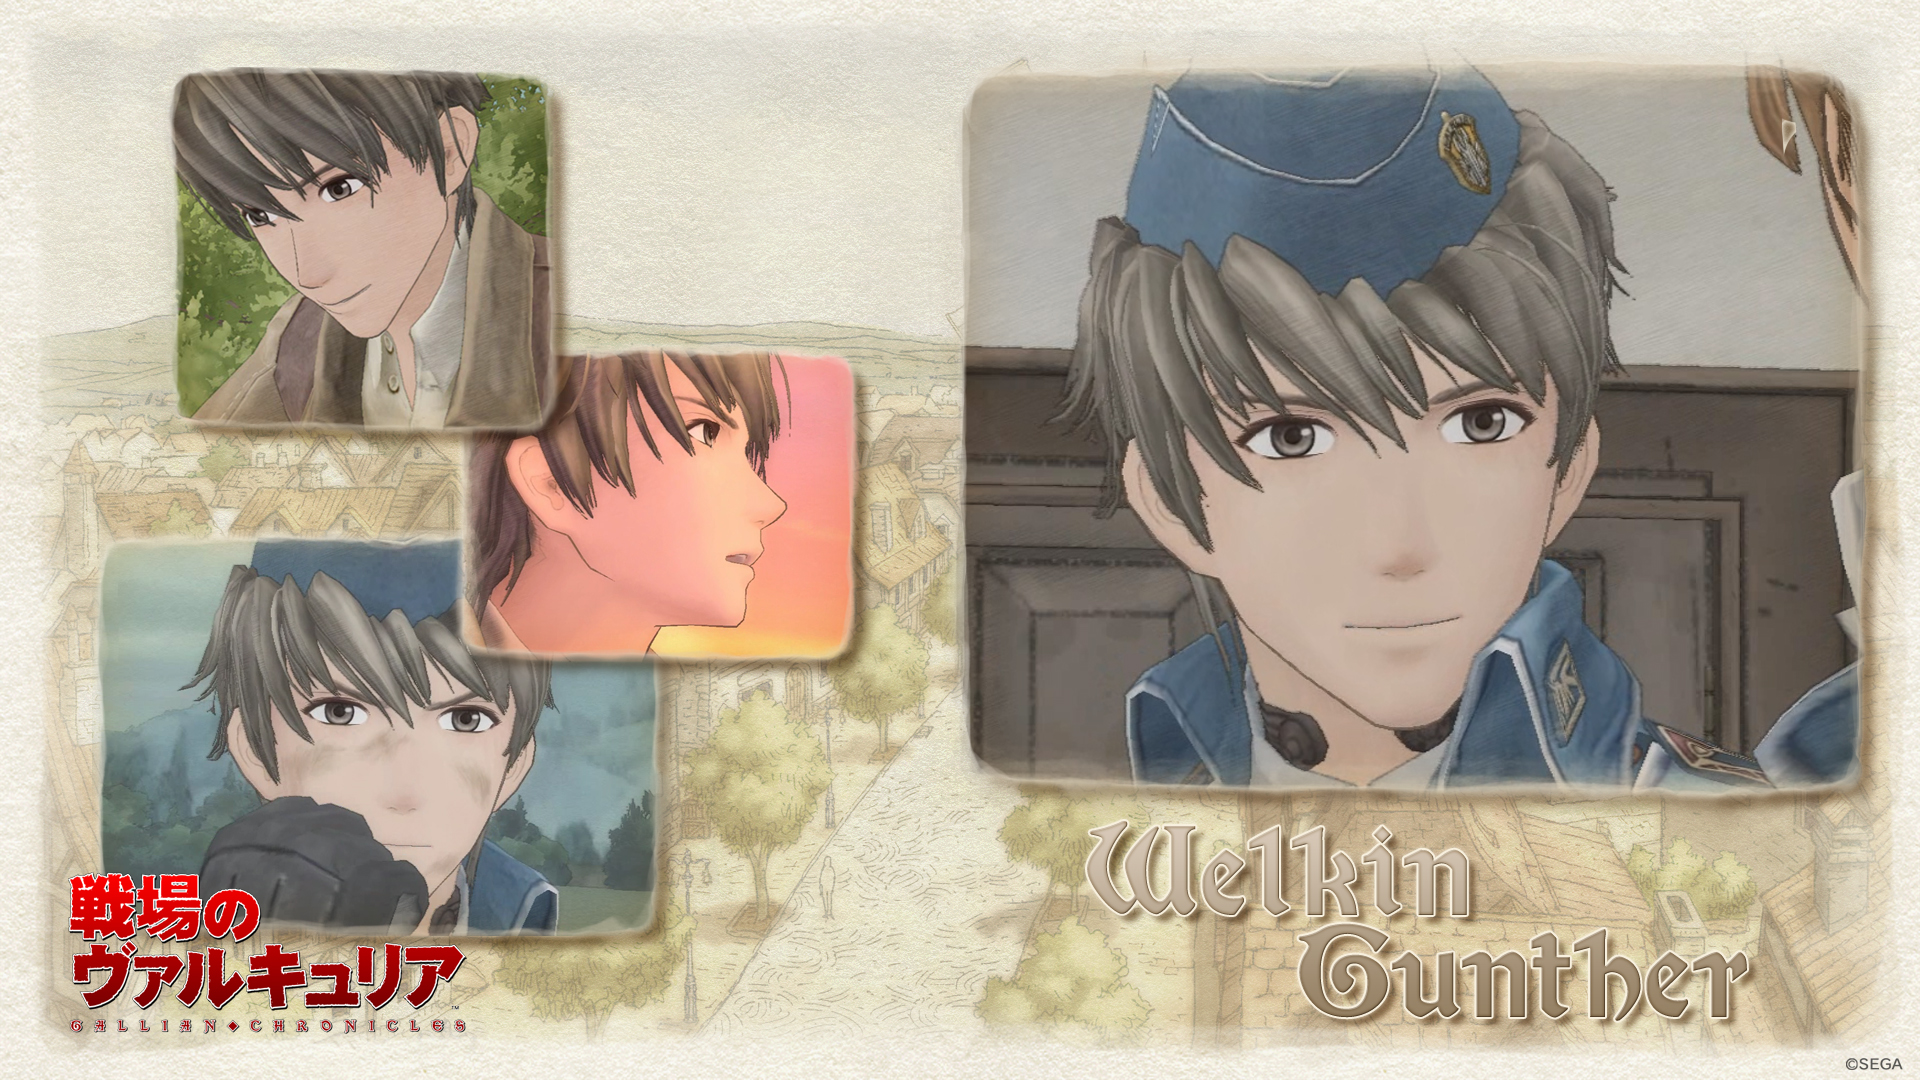 video game, valkyria chronicles, welkin gunther